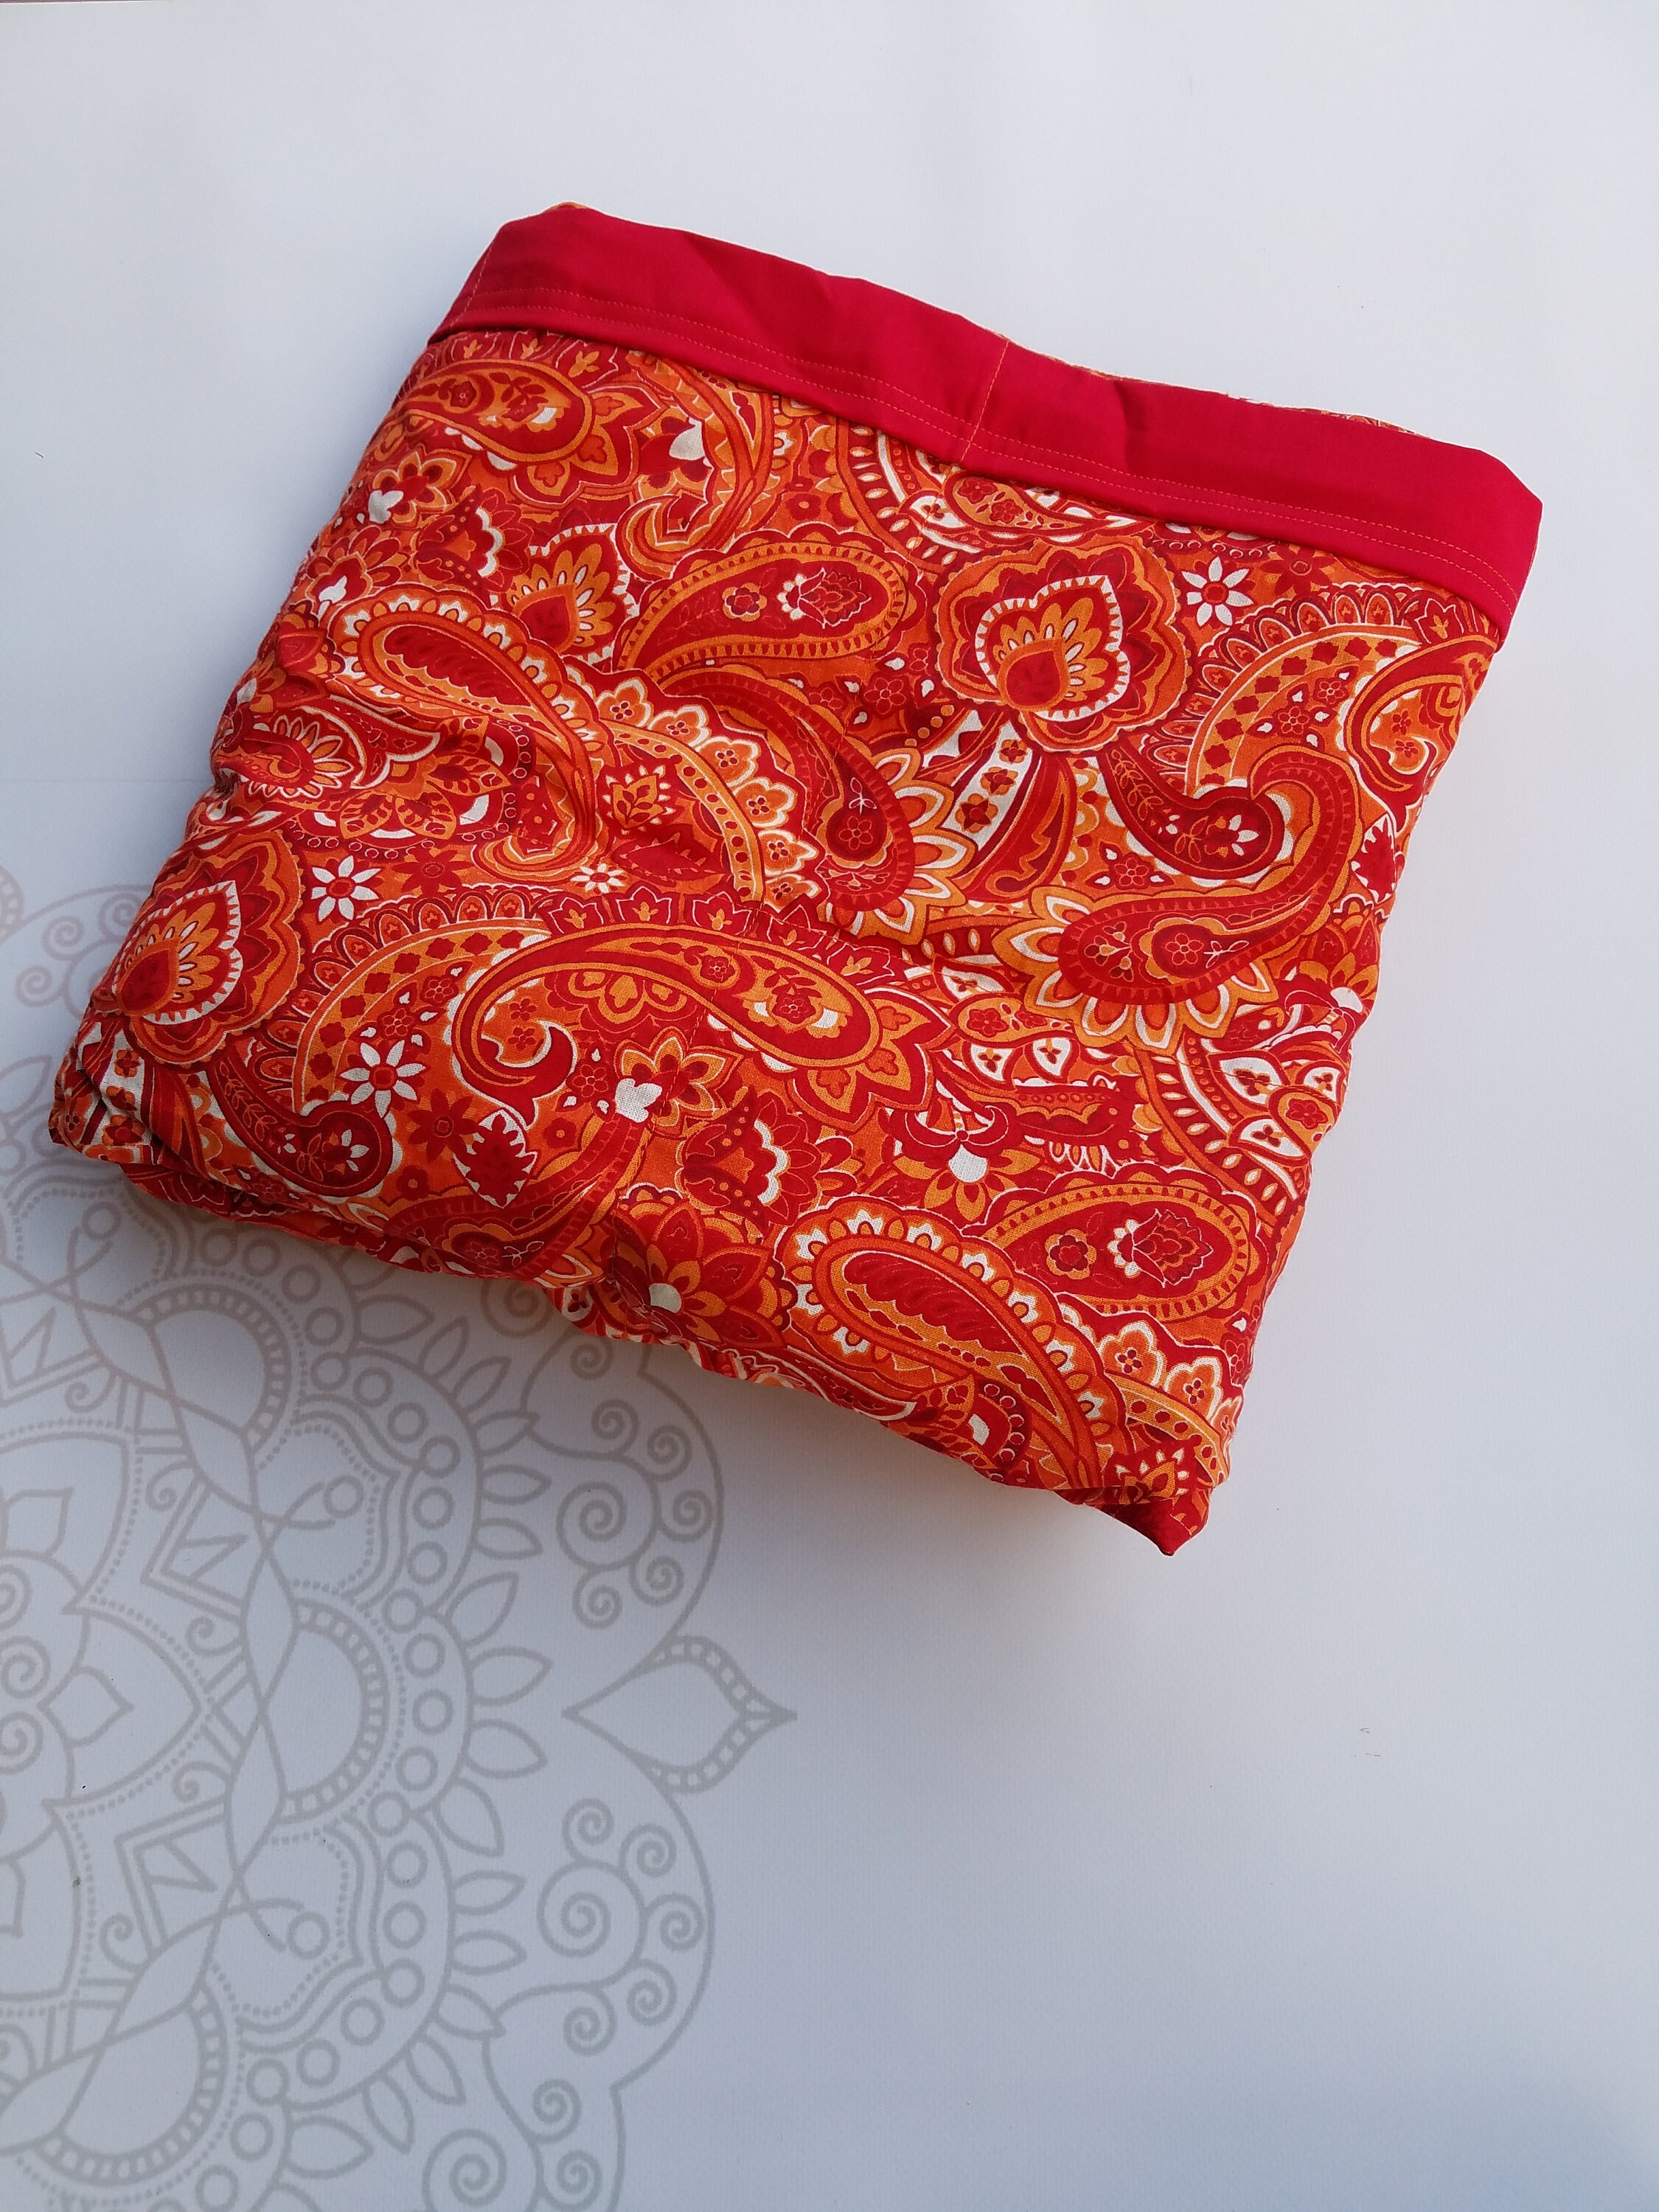 READY to SHIP, Weighted Blanket, 40x50-10 Pounds, Paisley Cotton Front